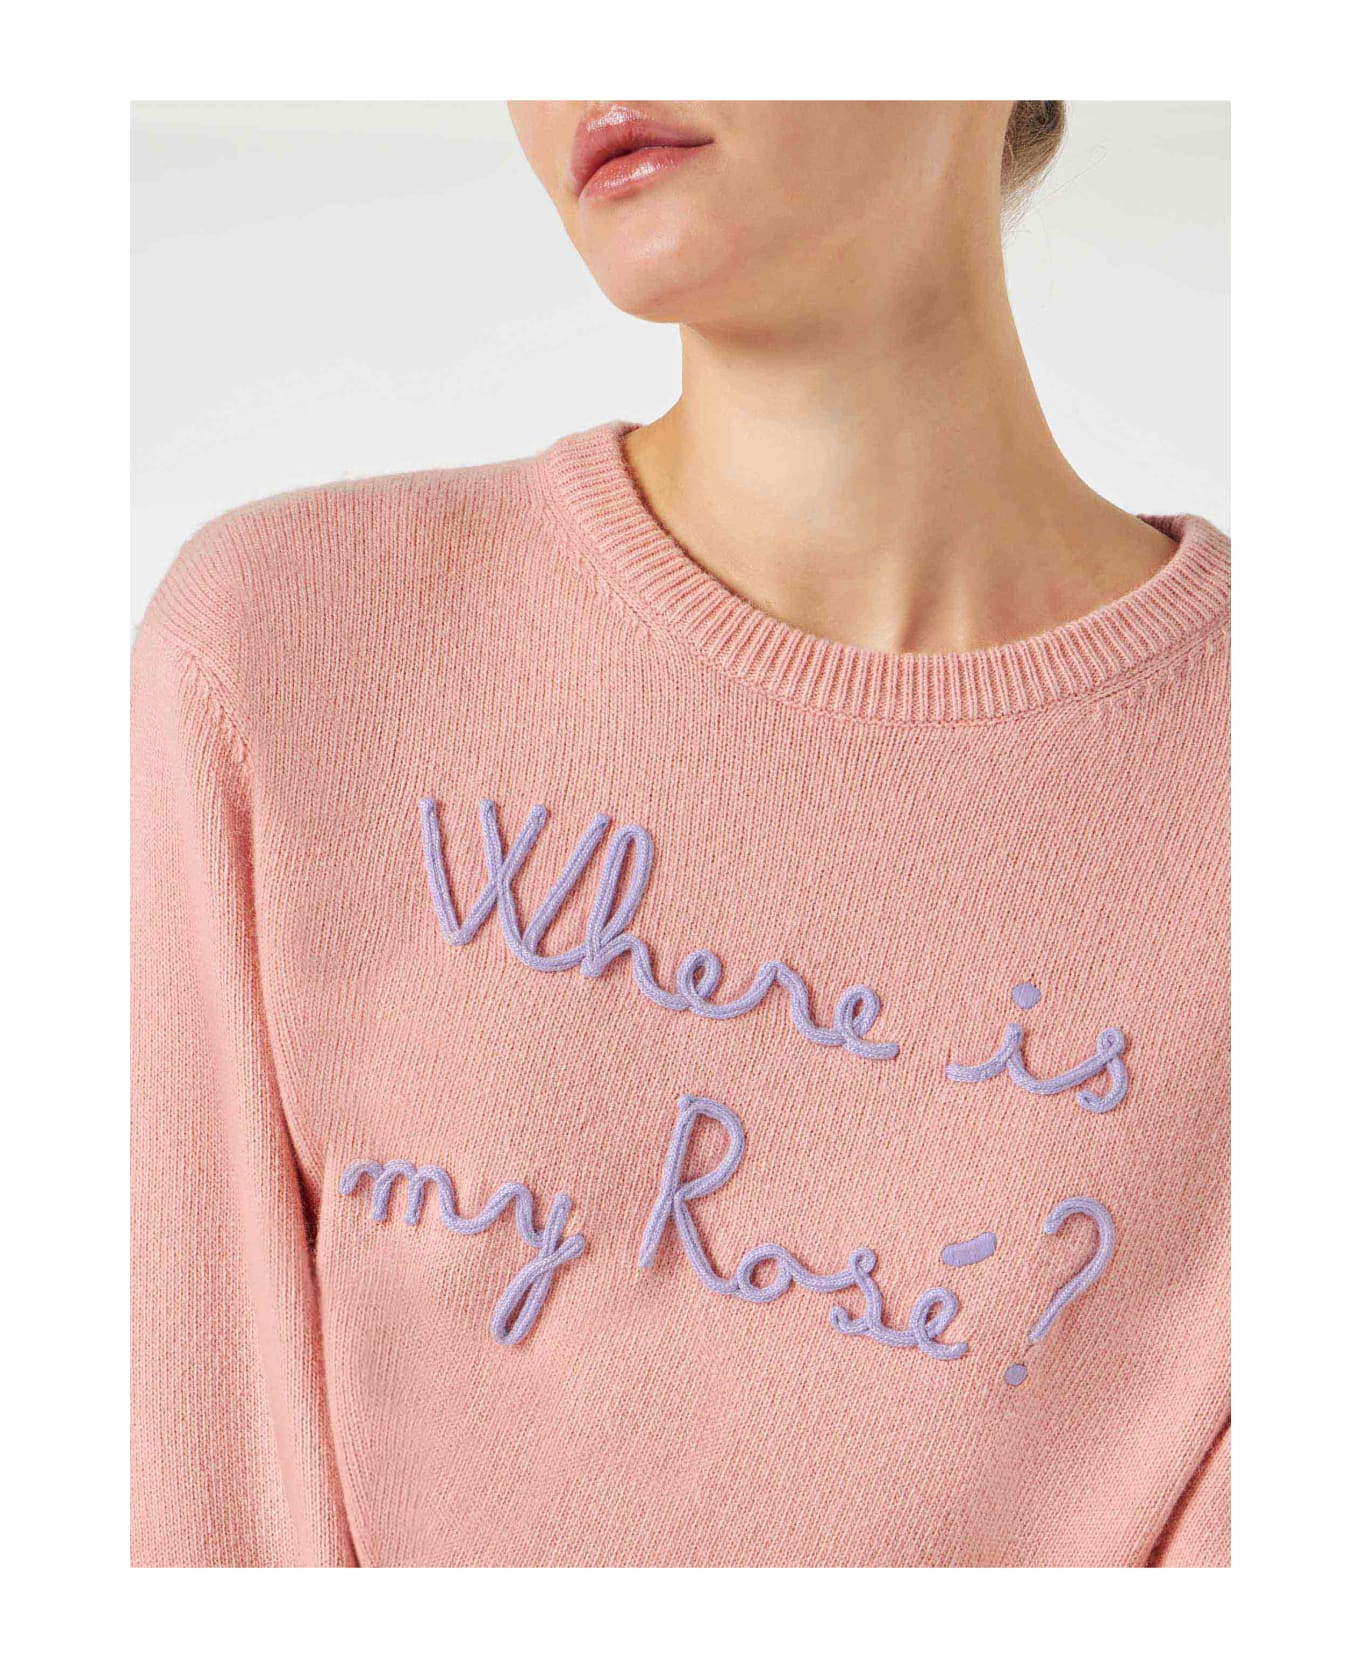 MC2 Saint Barth Woman Sweater With Where Is My Rosé? Embroidery - PINK ニットウェア